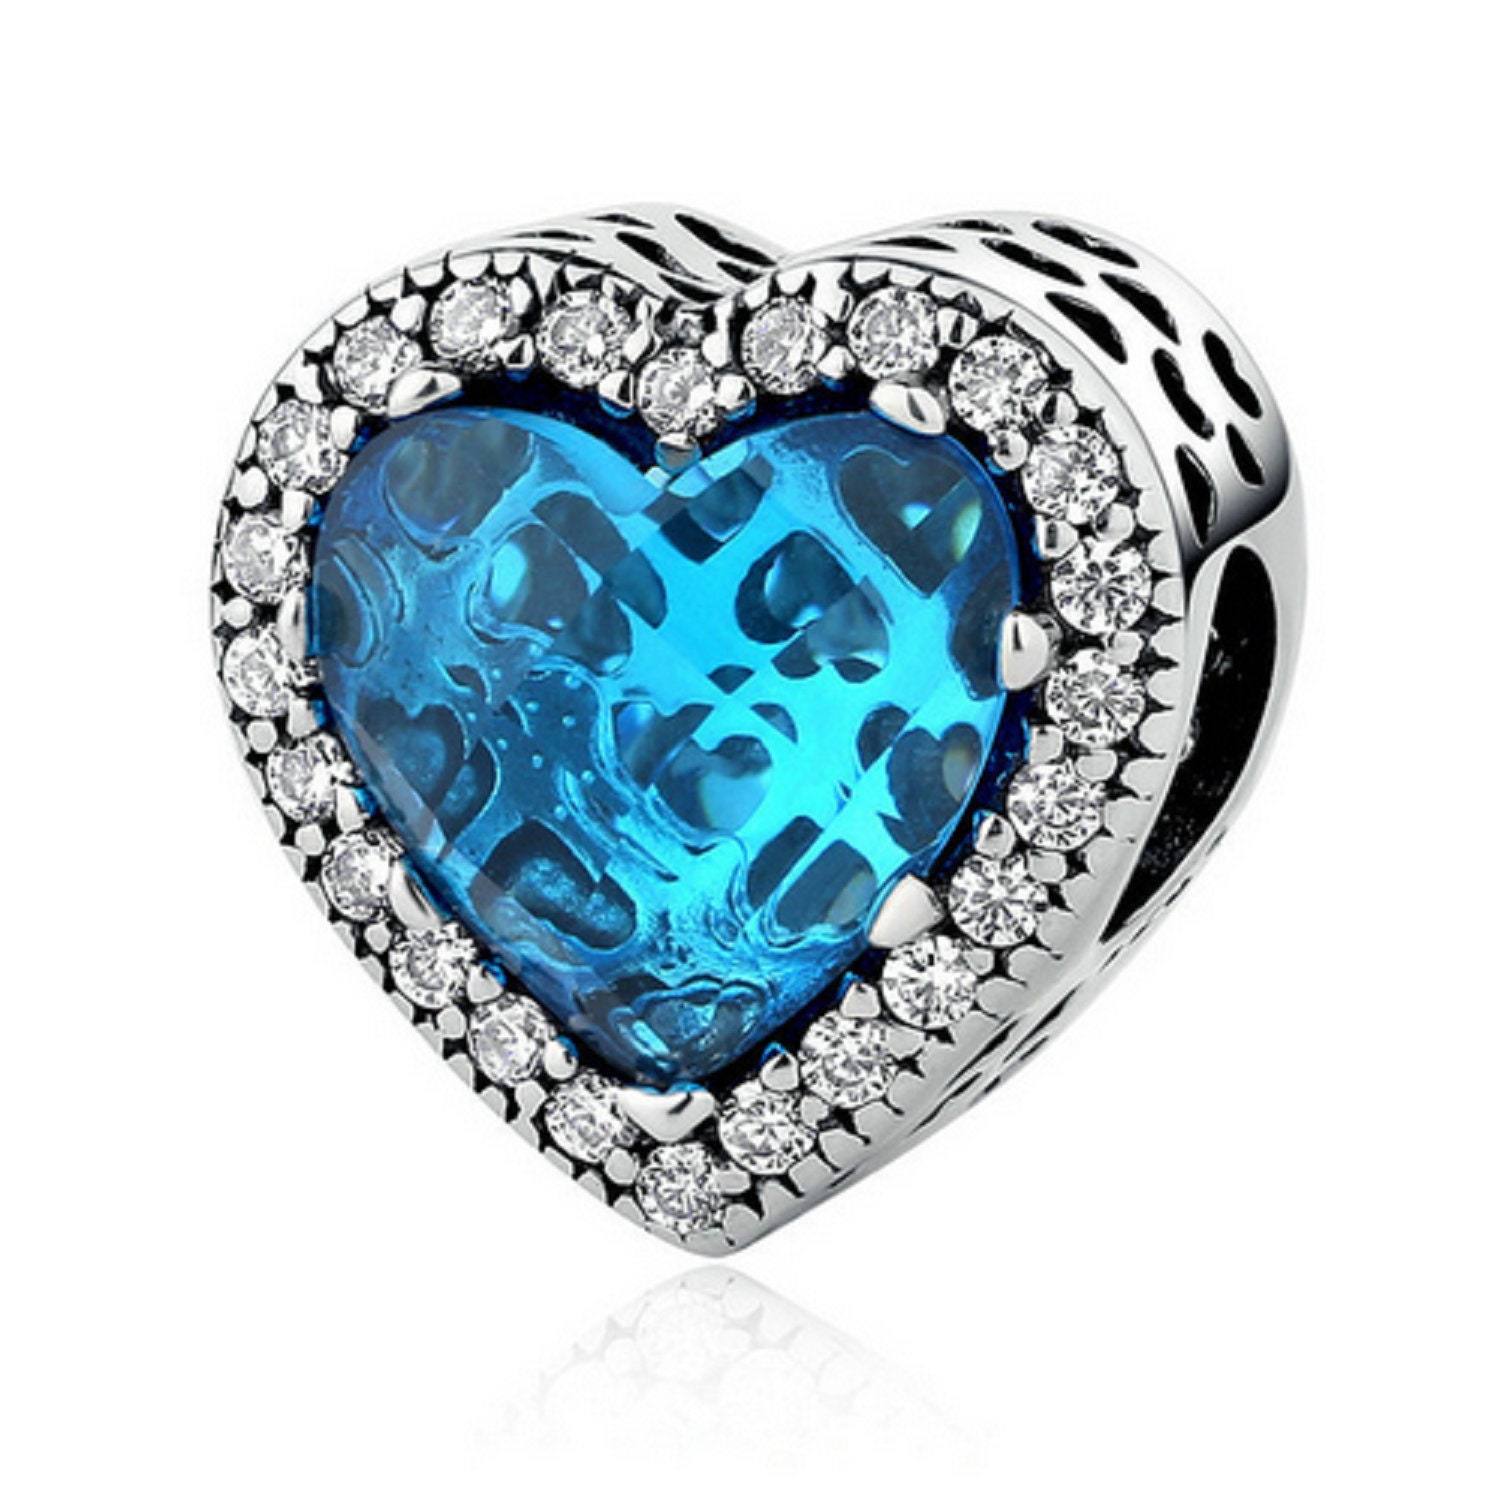 Authentic 925 Sterling Silver Charm Hearts Blue Crystal & Clear CZ Fit Bracelets 